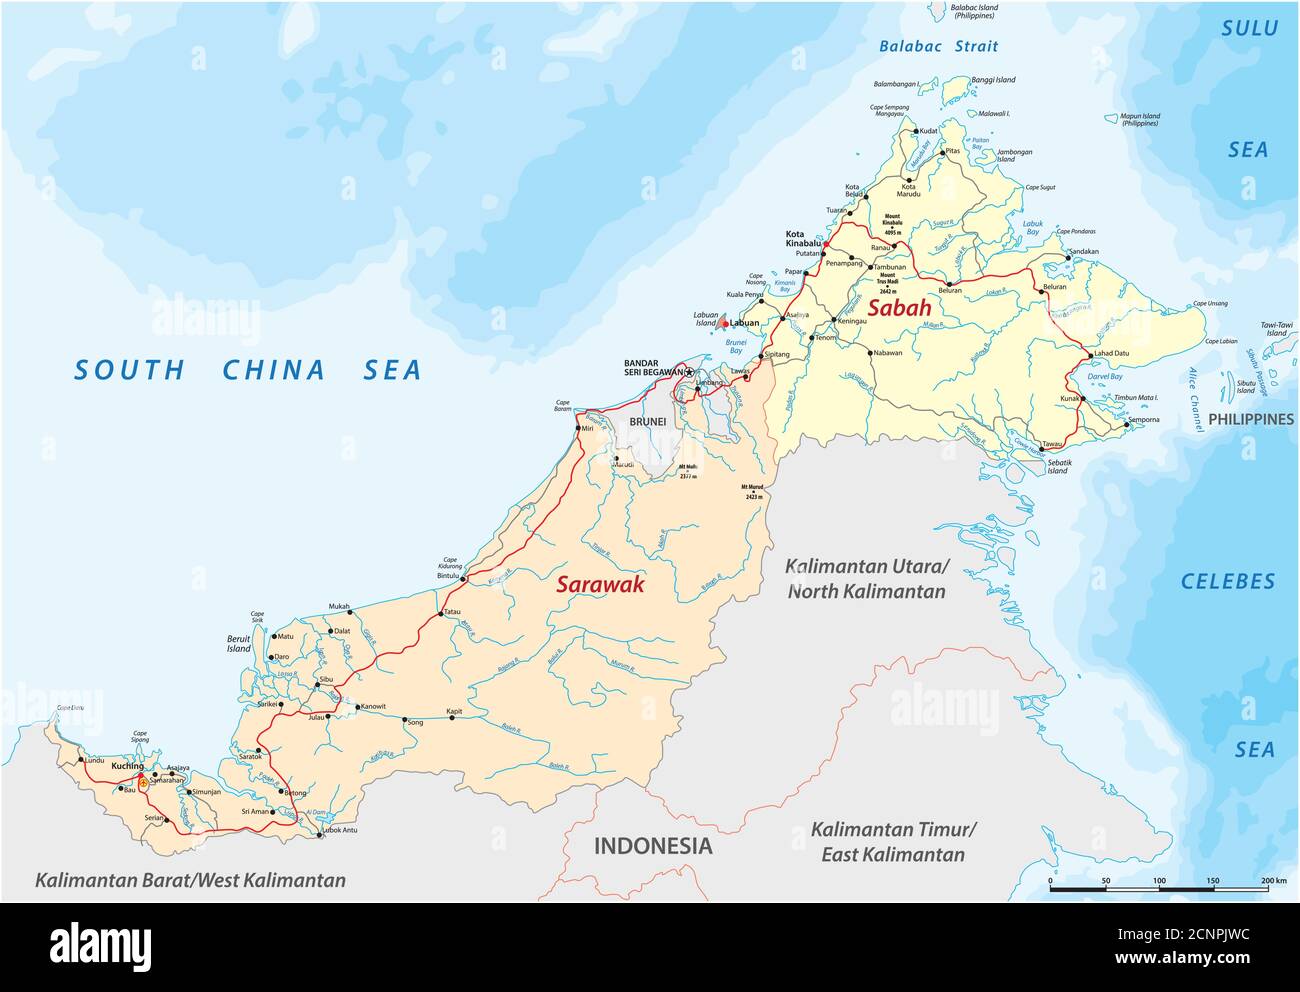 vector road map of the Malaysian states of Sarawak and Sabah on the island of Borneo, Malaysia Stock Vector